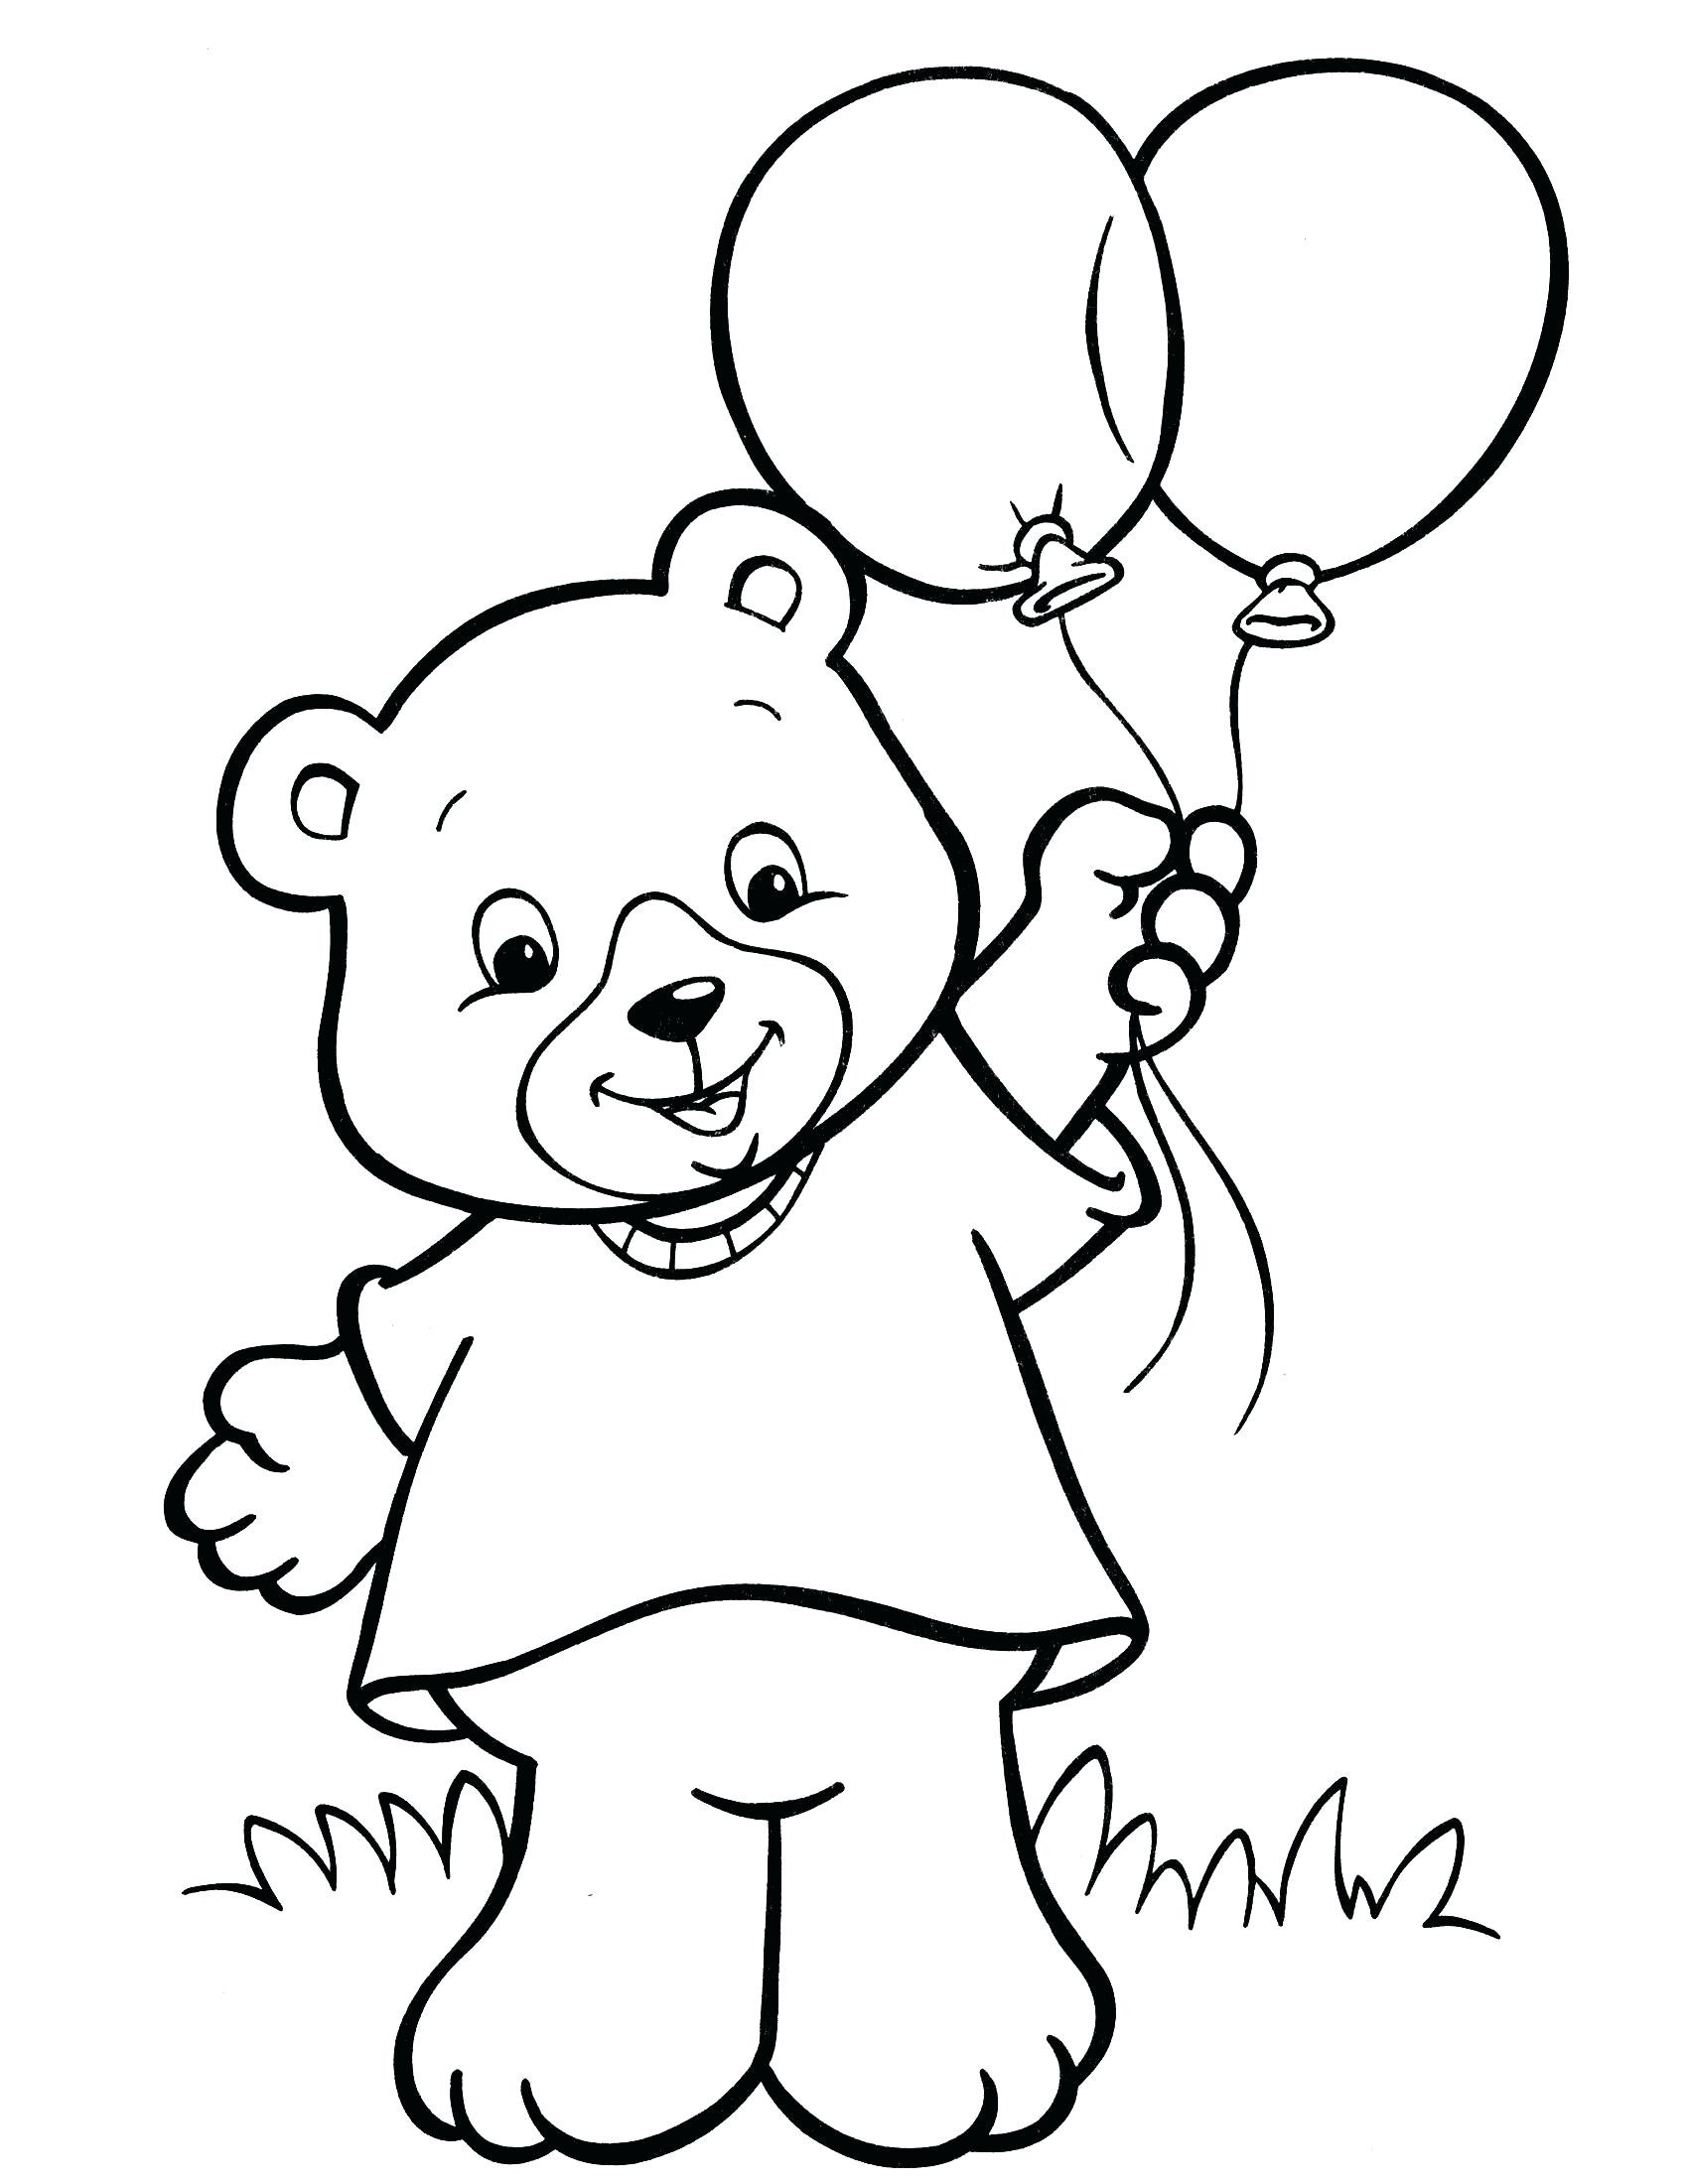 13 Year Old Coloring Pages at GetColoringscom Free